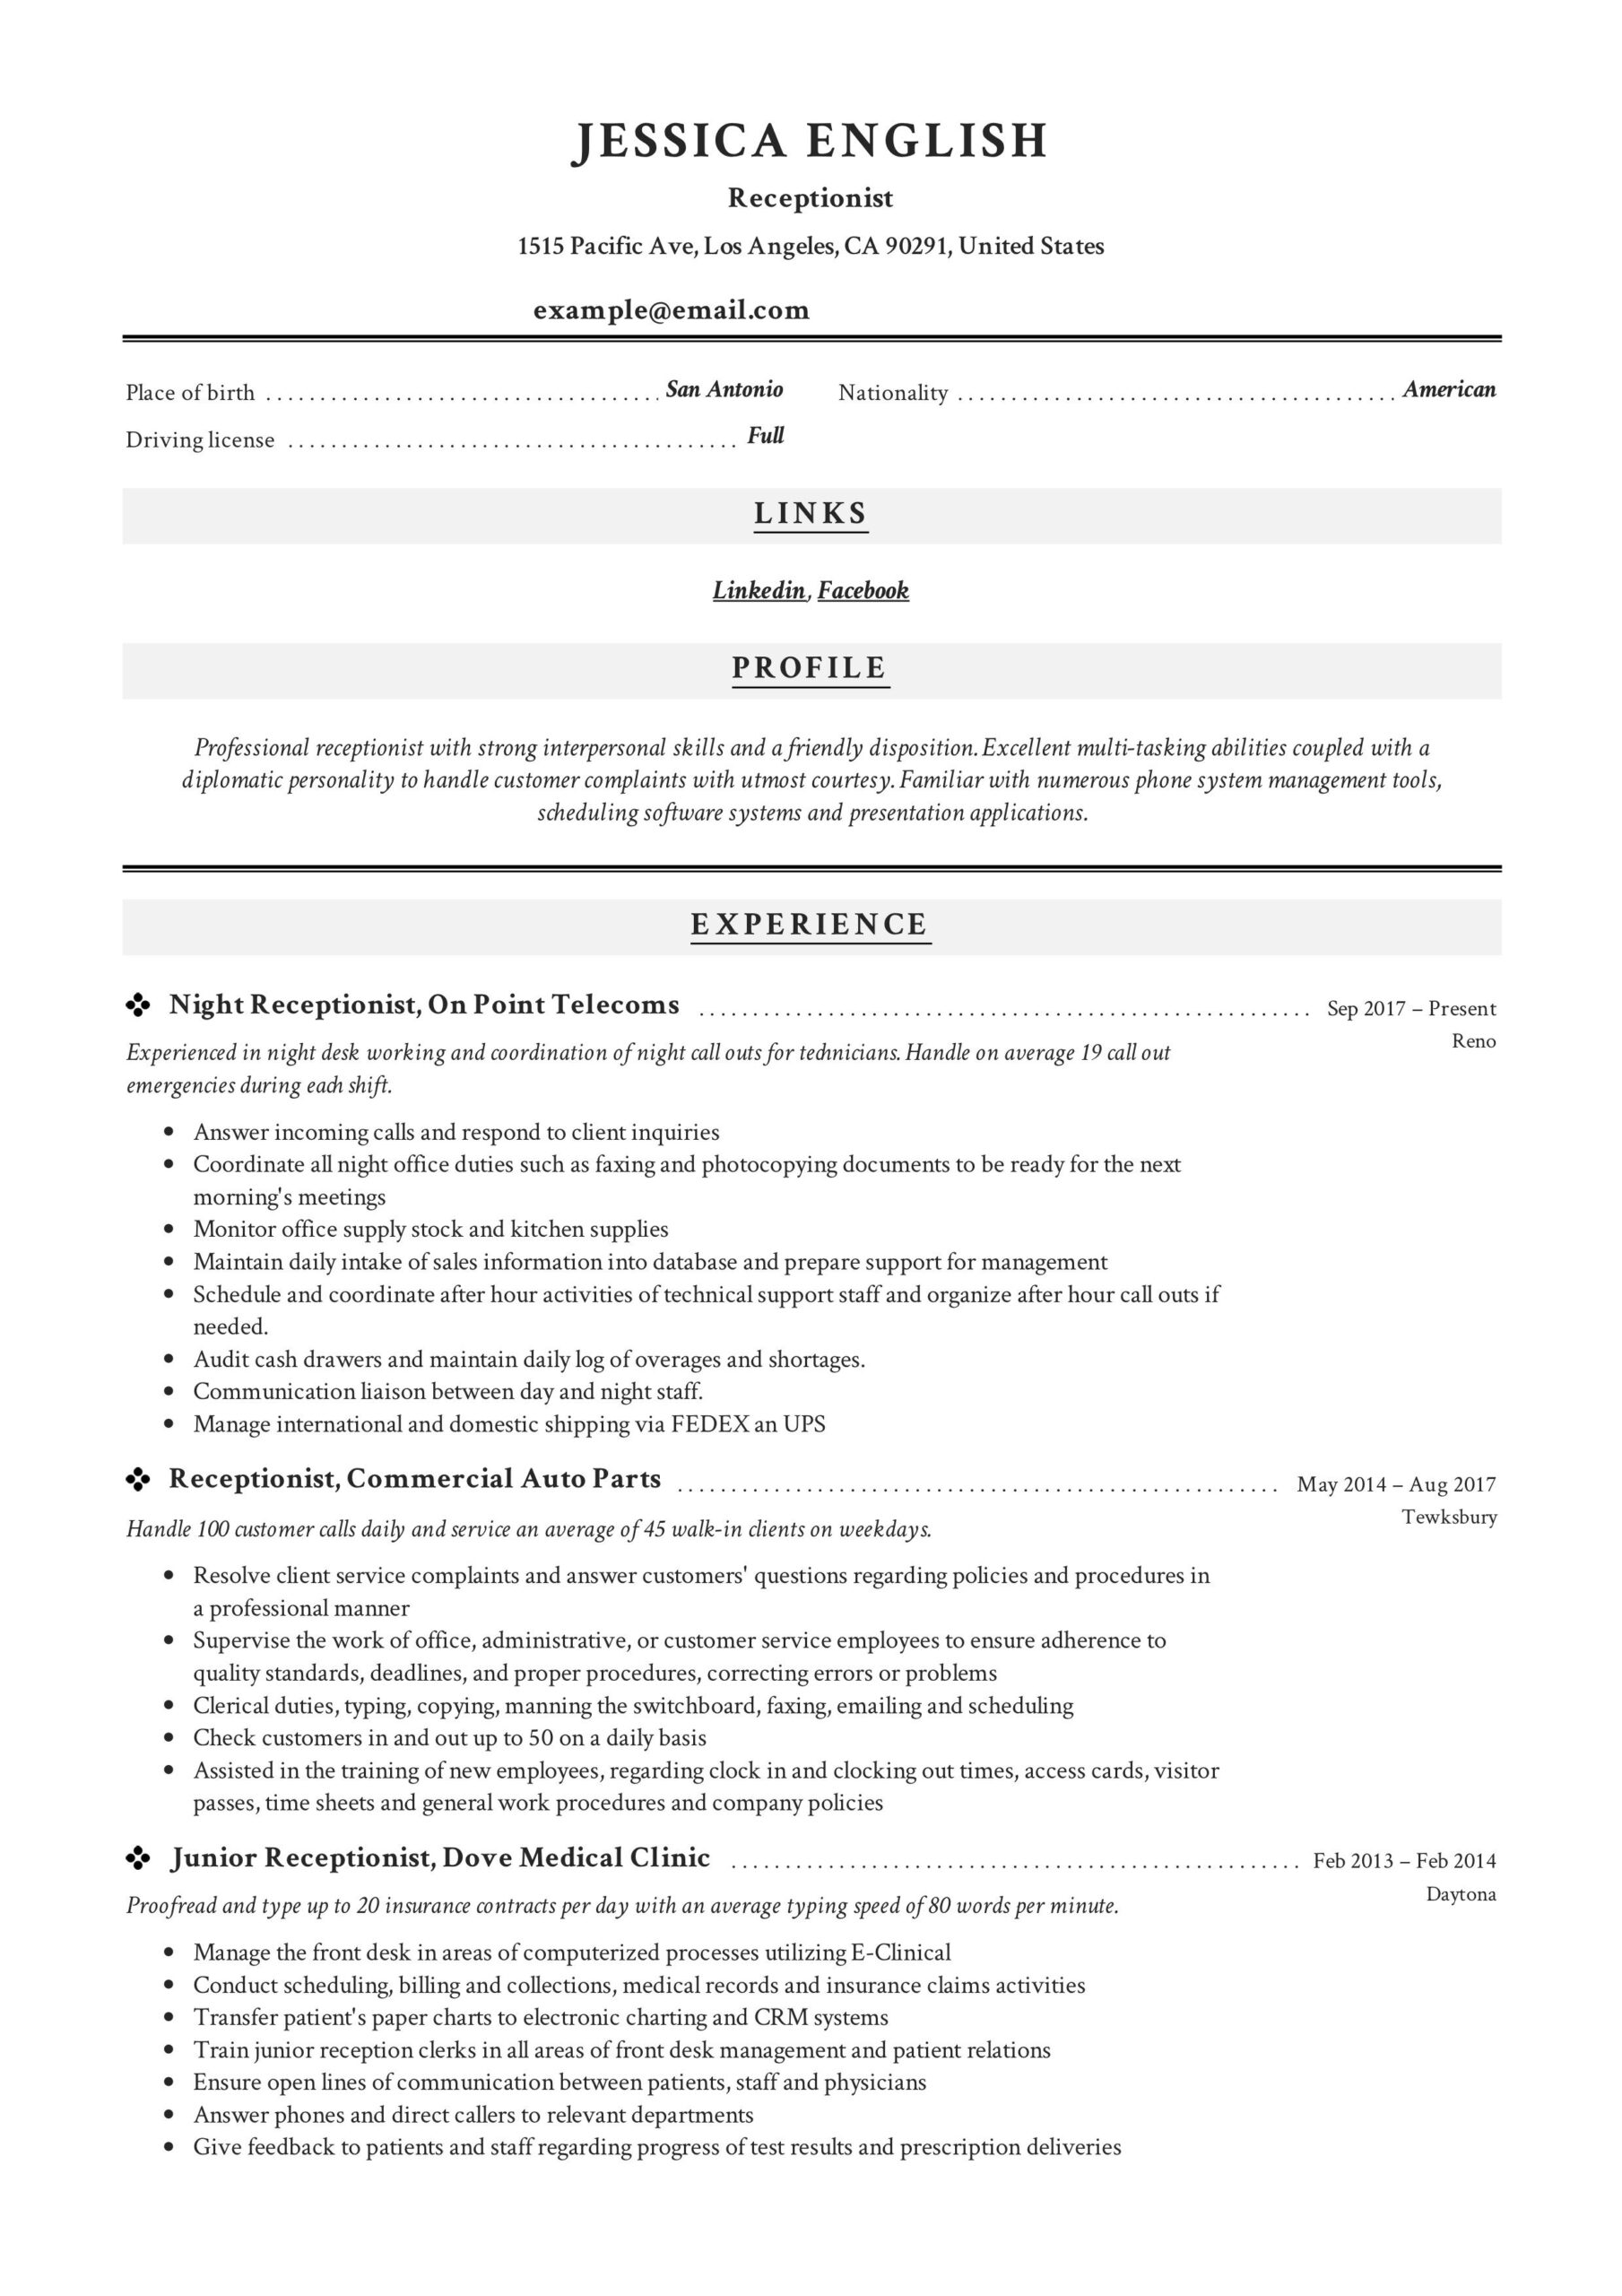 Pin On Receptionist Resume Templates within Curatorial Statement Template